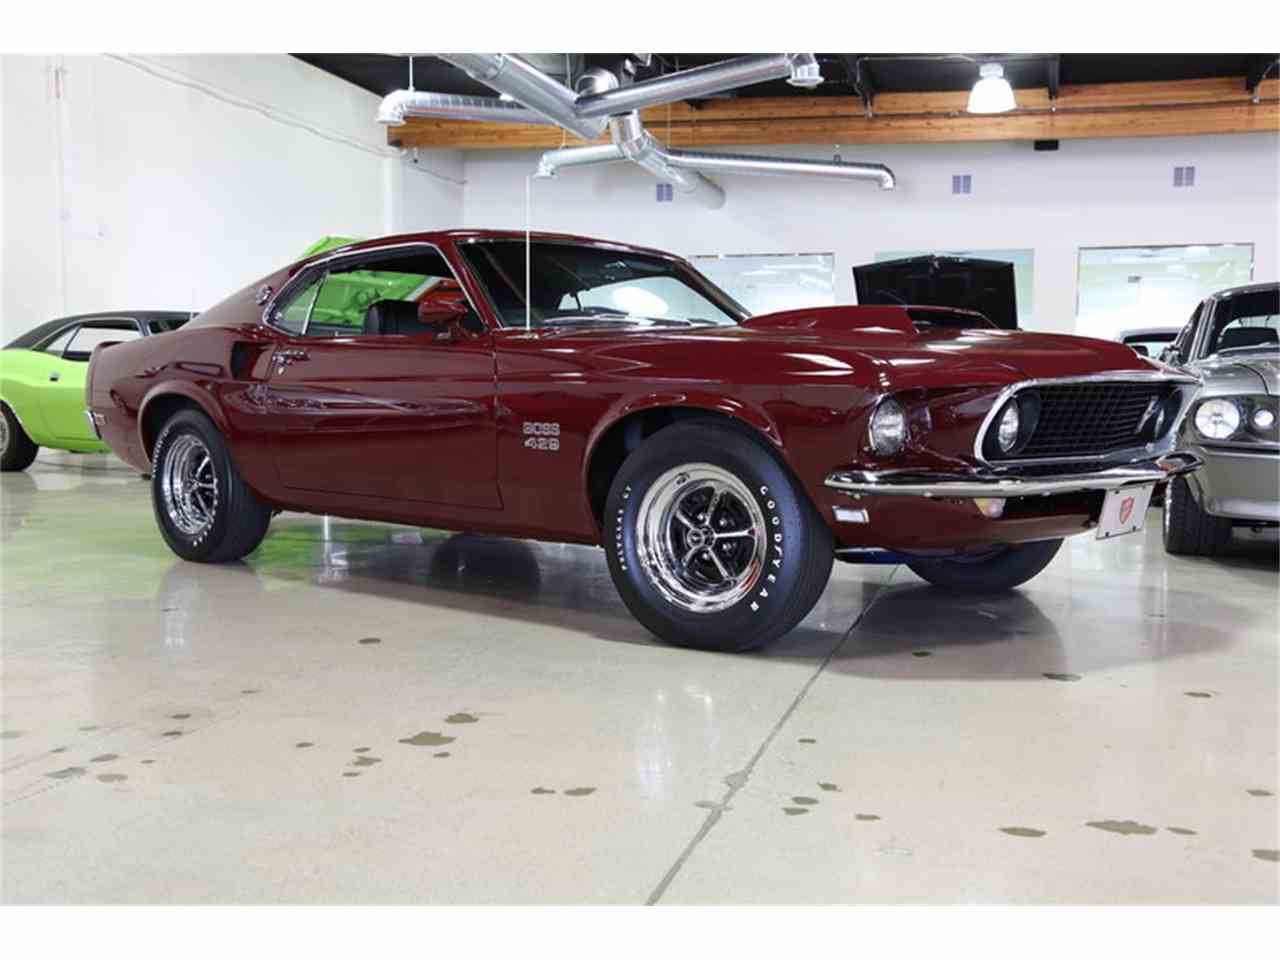 For Sale: 1969 Ford Mustang Boss 429 for $429,900